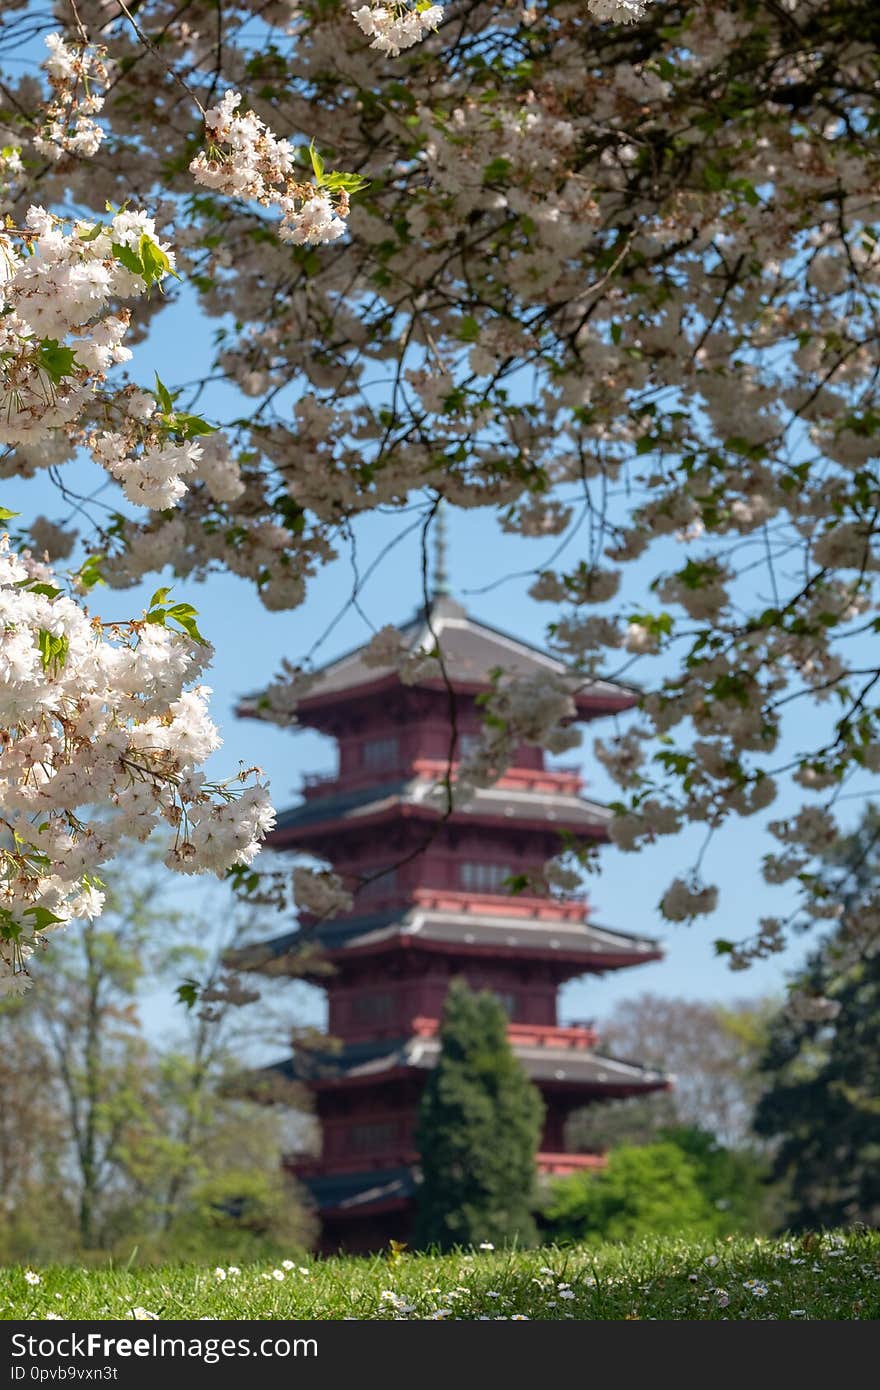 The Japanese Tower or Pagoda in the grounds of the Castle of Laeken, the home in north Brussels, Belgium, of the Belgian royal family. Cherry blossom in foreground. The Japanese Tower or Pagoda in the grounds of the Castle of Laeken, the home in north Brussels, Belgium, of the Belgian royal family. Cherry blossom in foreground.